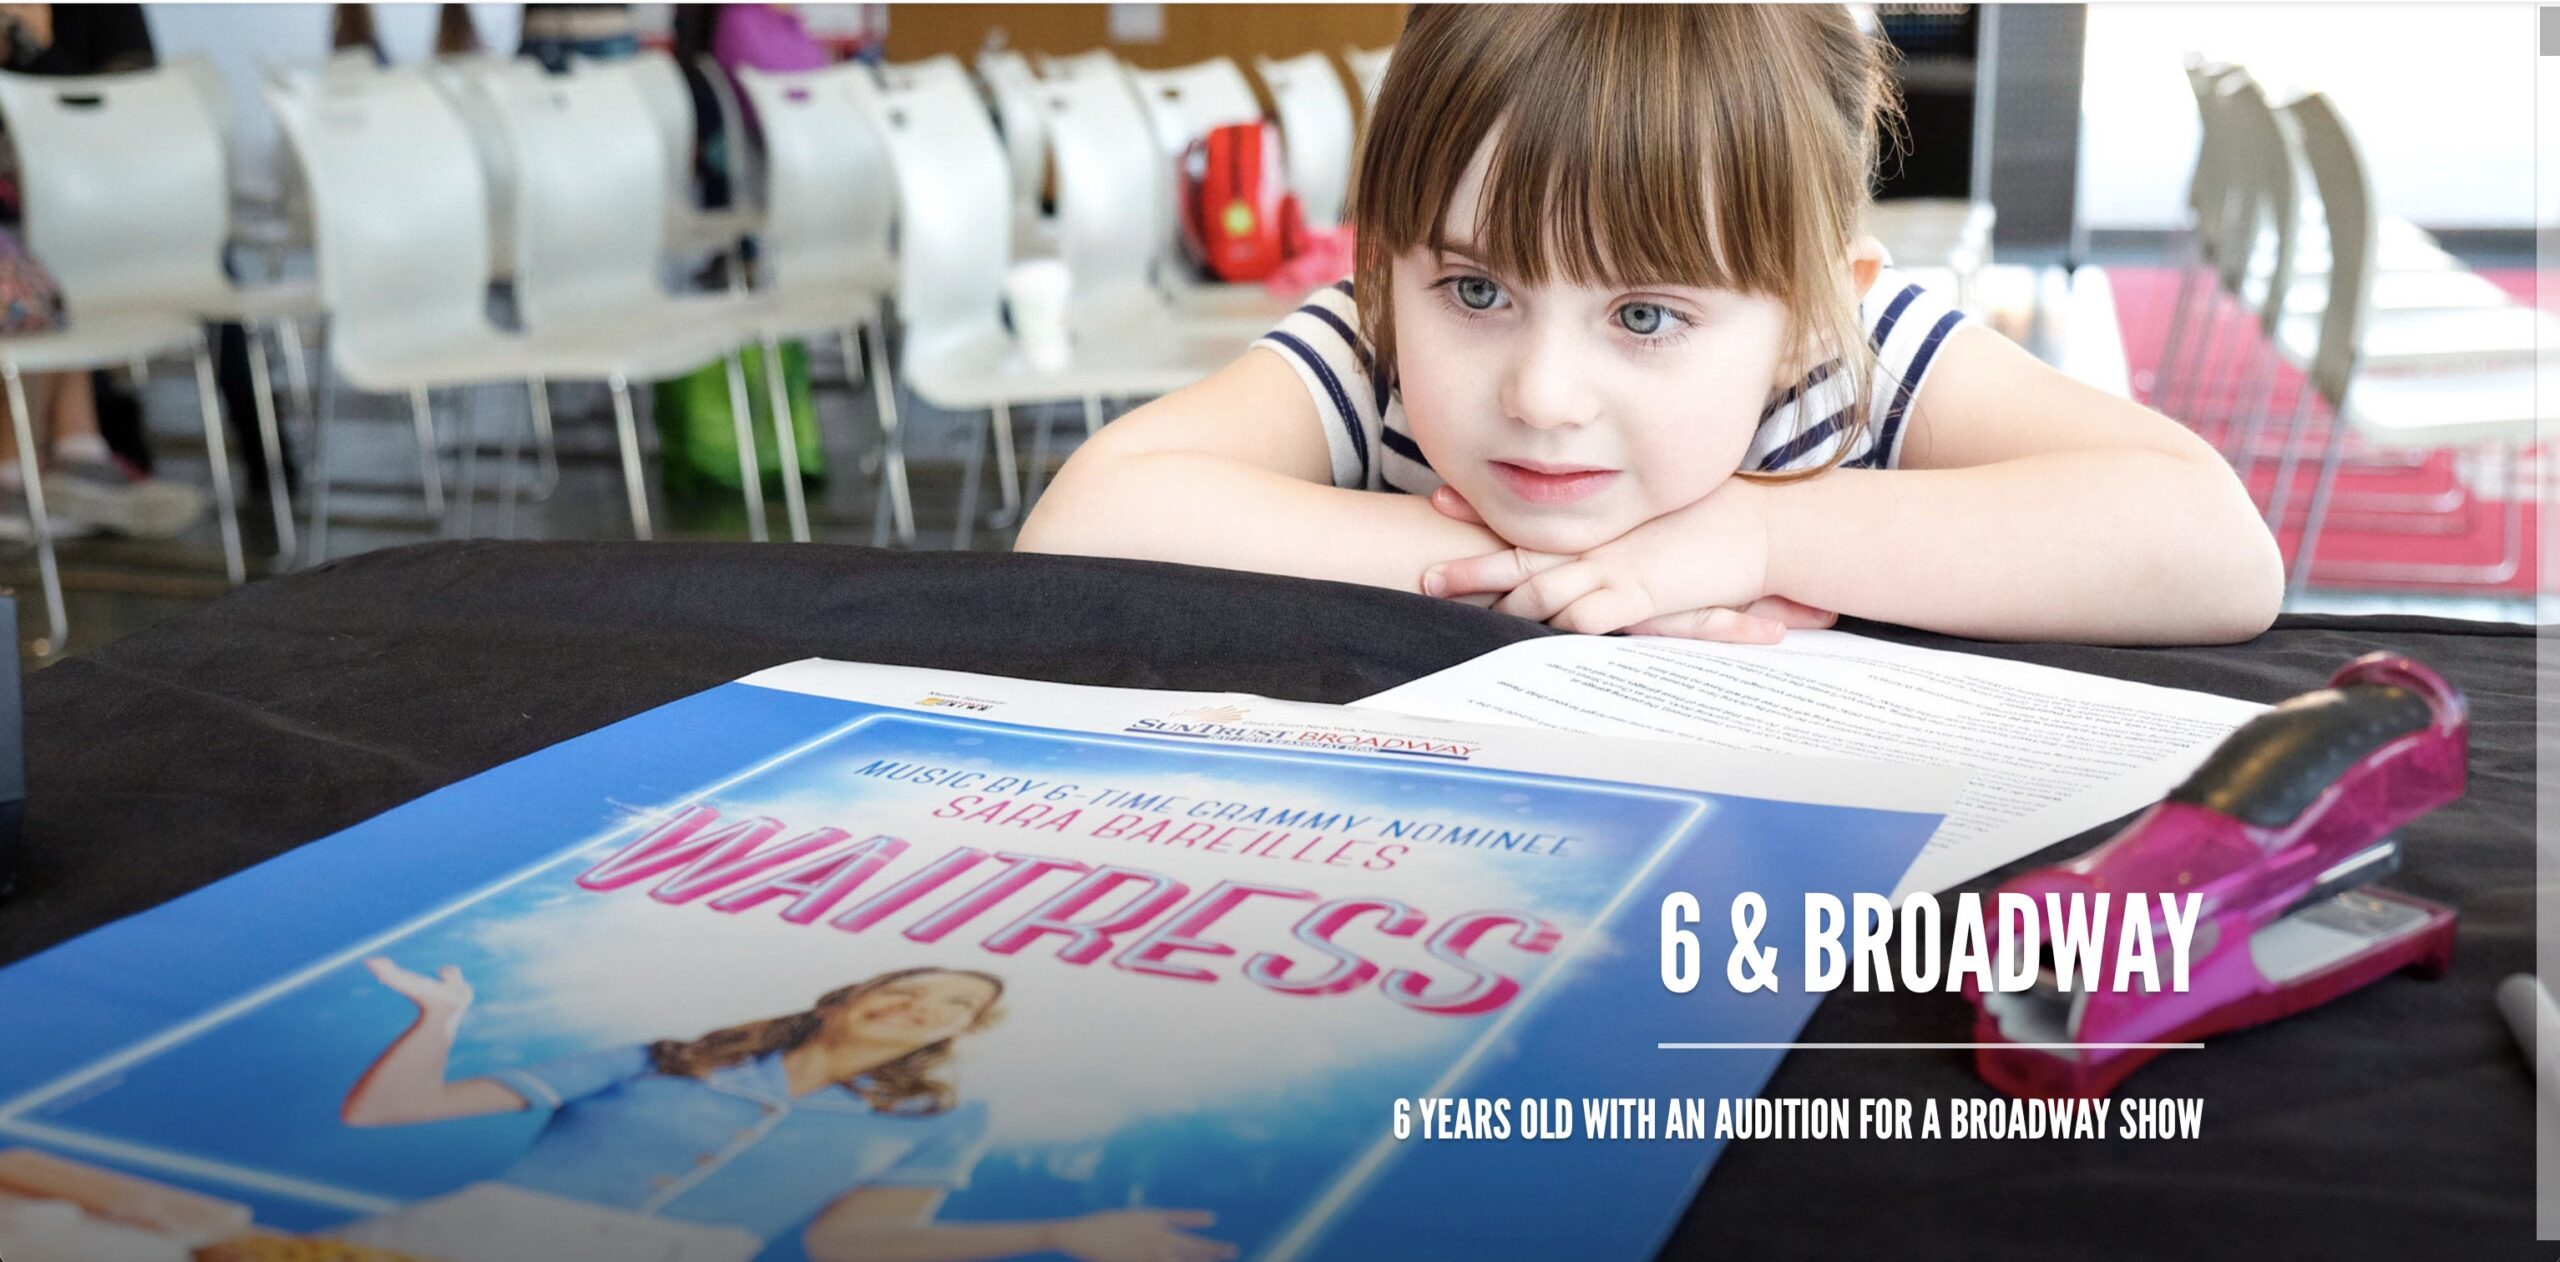 cover of a digital magazine with "6 & Broadway" and a young girl on the cover